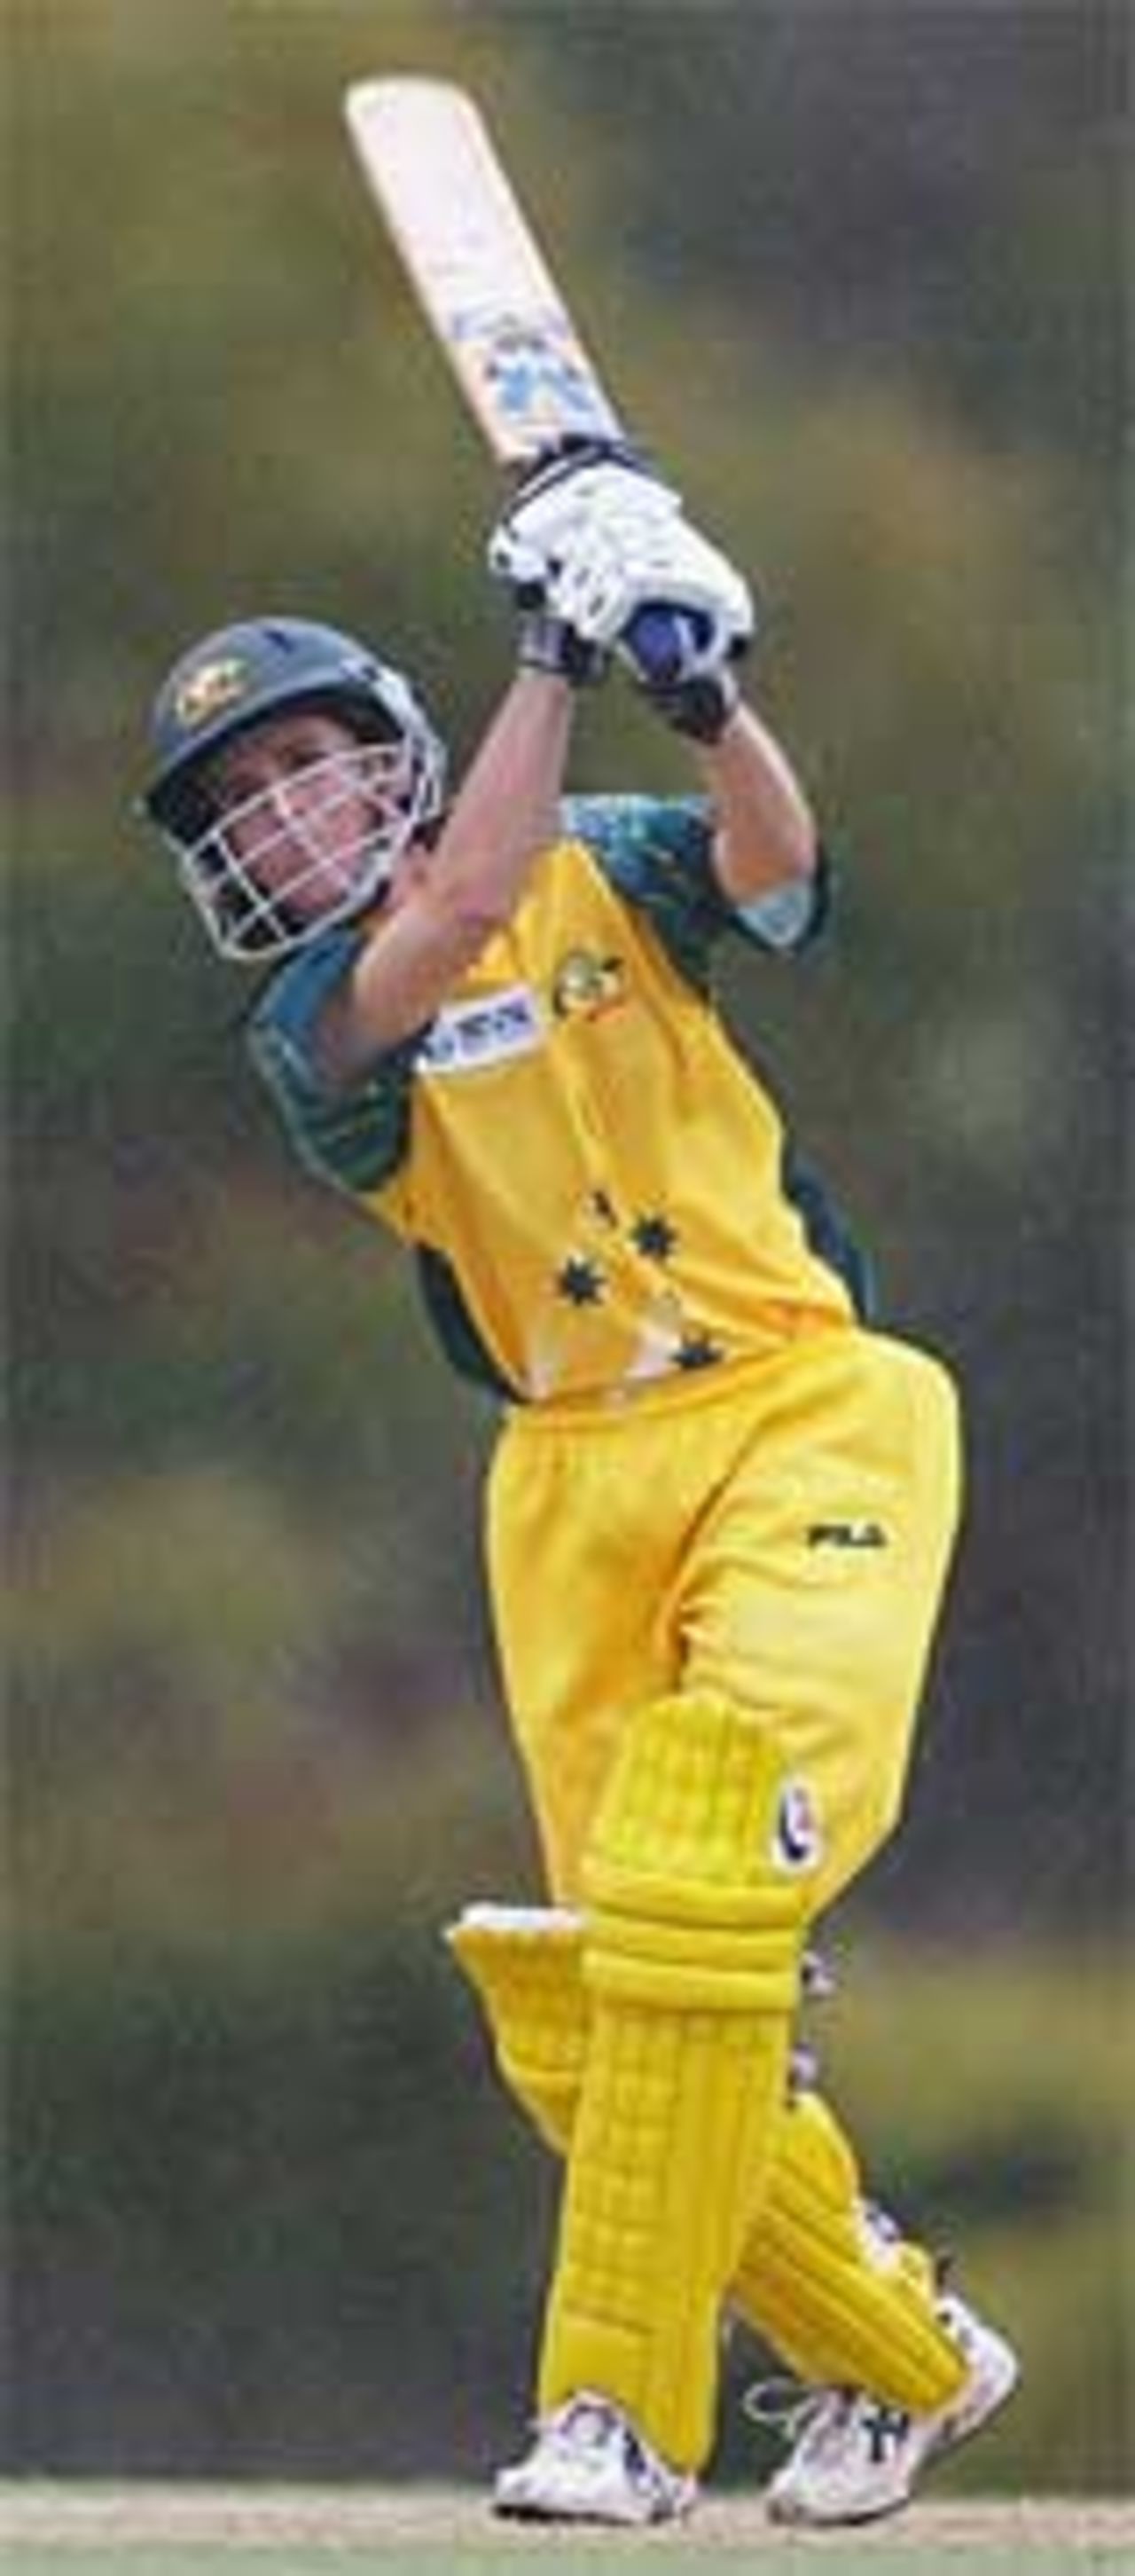 Belinda Clark hits out on her way to 86, Australia v New Zealand, 1st ODI, Perth, March 10, 2005